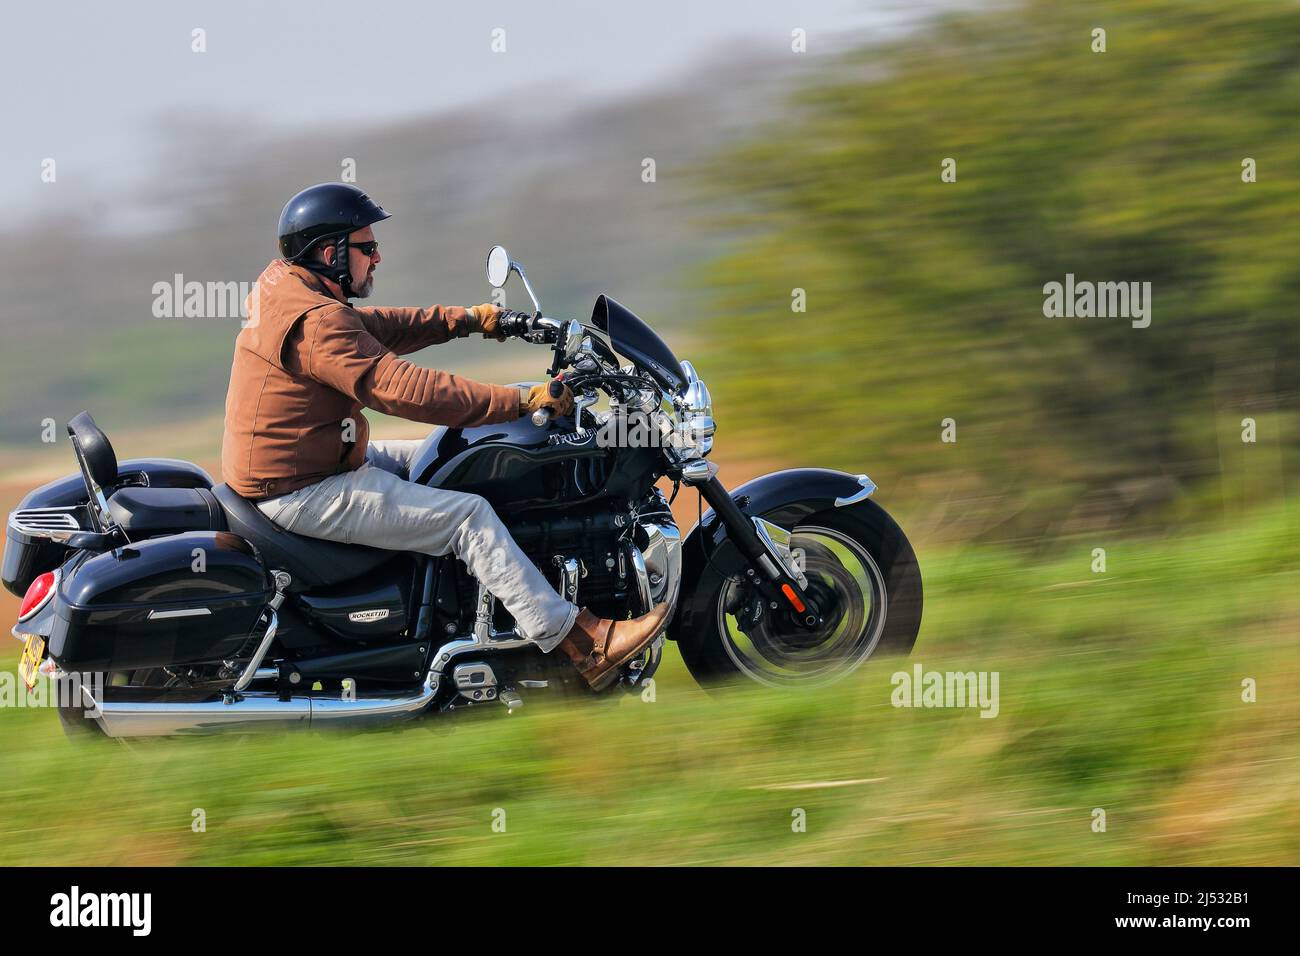 A motorcyclist riding a Triumph Rocket 3 motorcycle heading to Squires Bikers Cafe in Sherburn in Elmet,North Yorkshire,UK Stock Photo